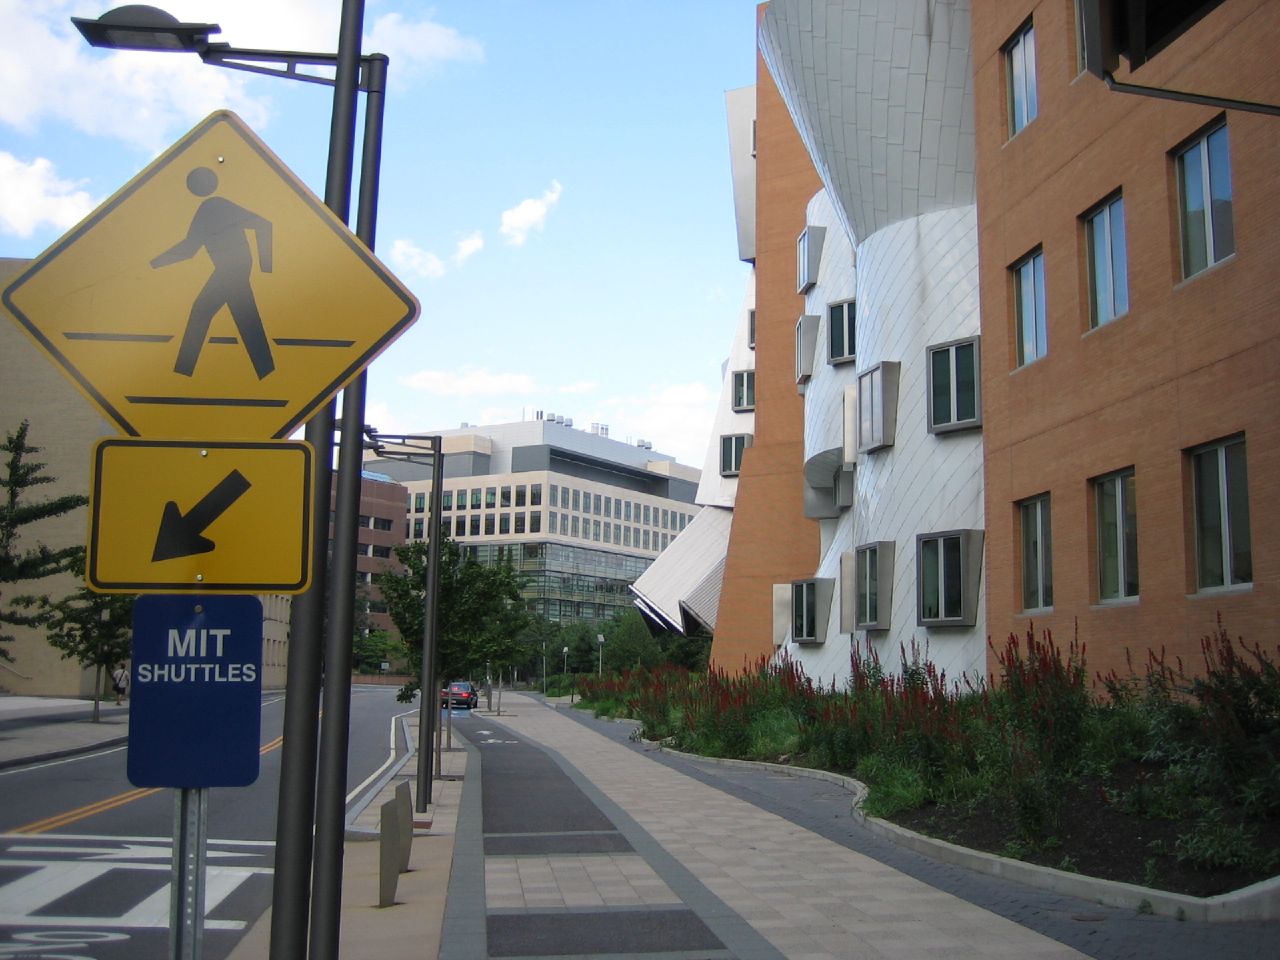 a pedestrian crossing sign on a sidewalk next to two buildings